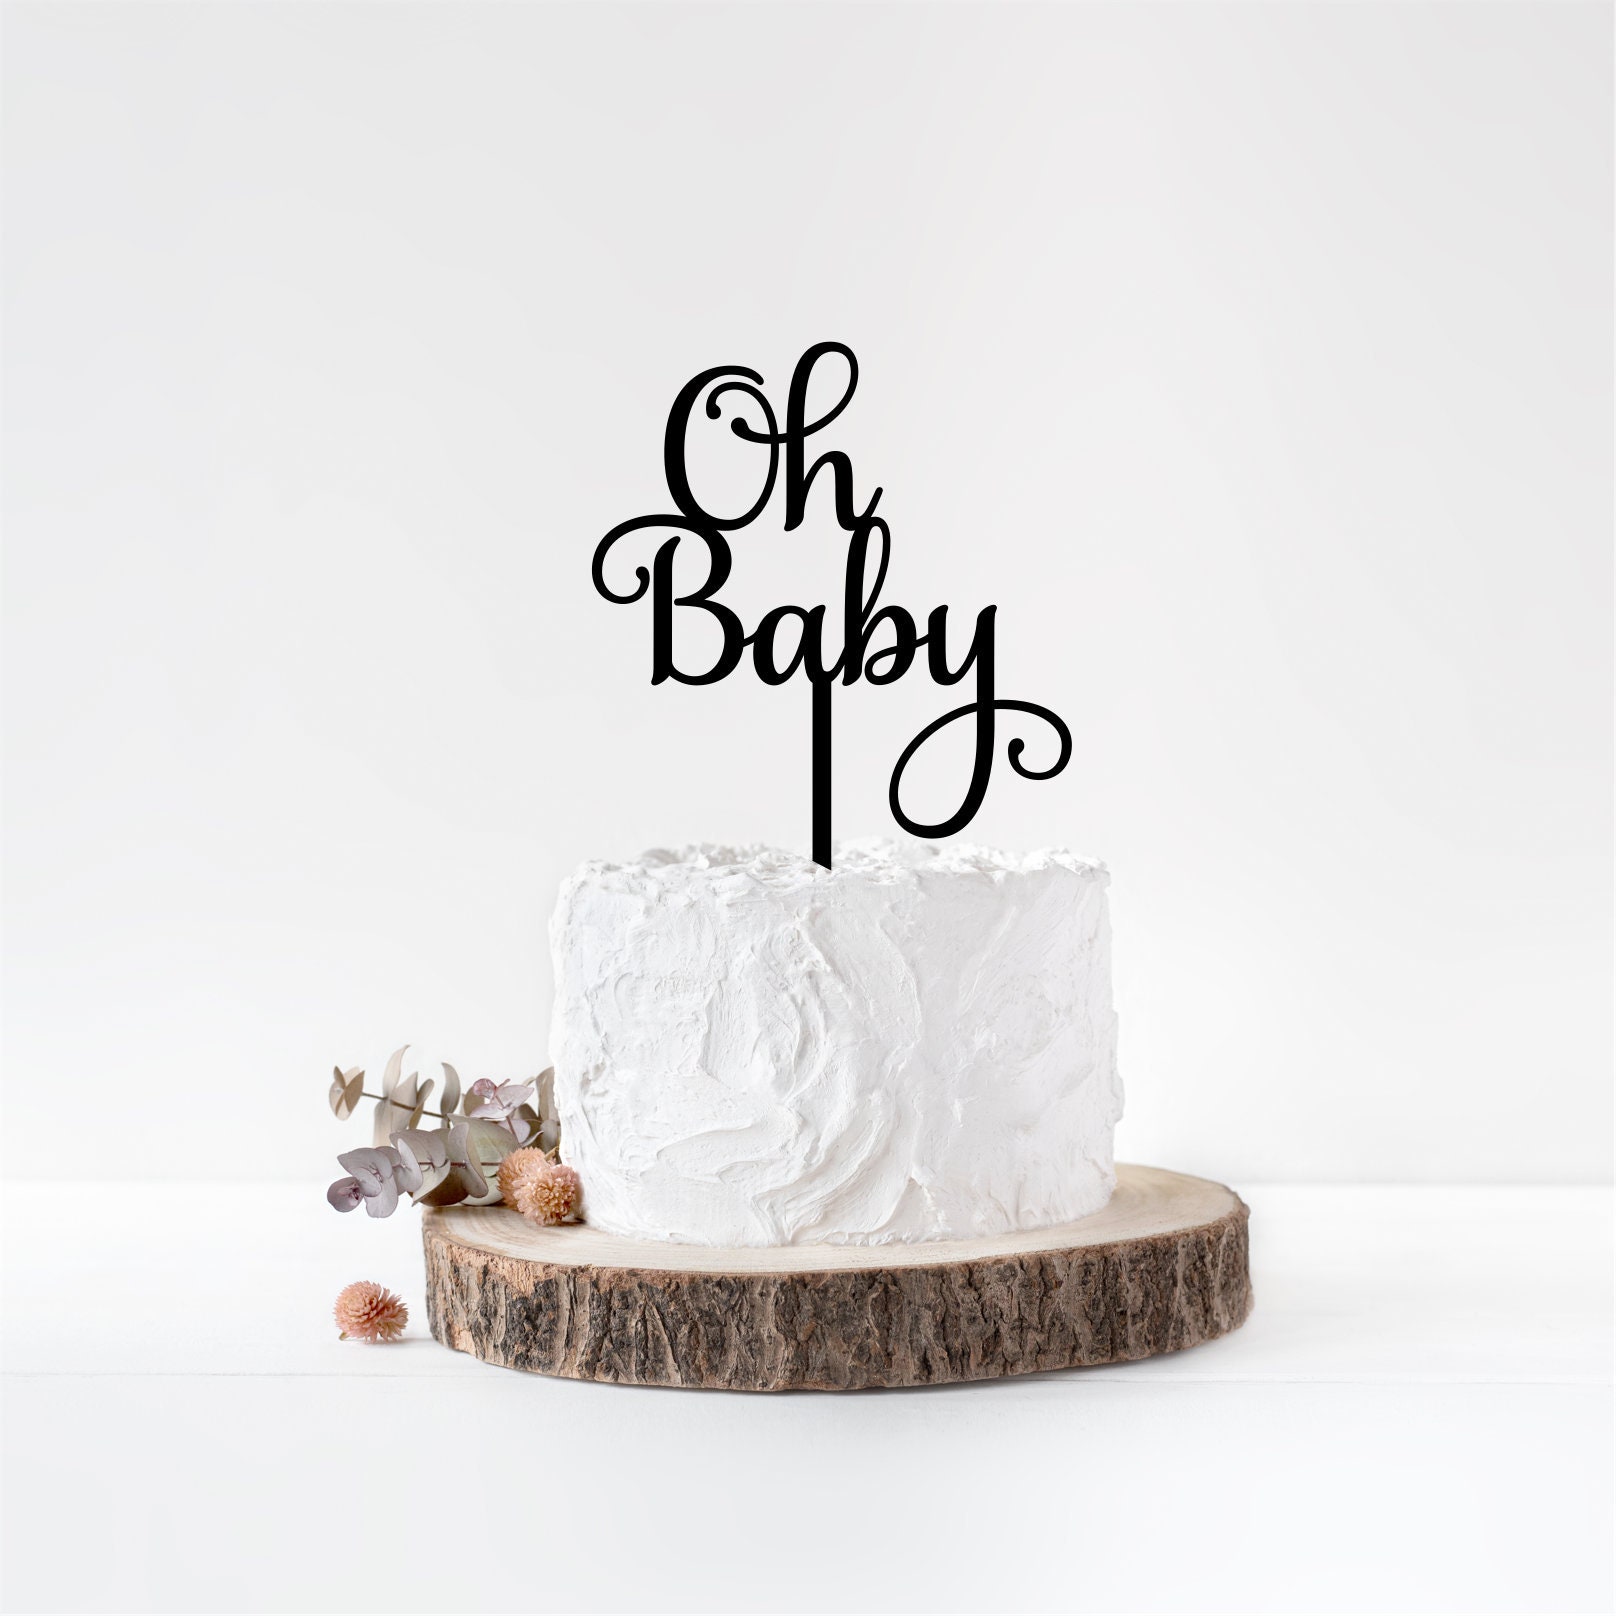 Oh Baby Cake Topper Oh Baby Cake Topper Black Oh Baby Cake Etsy